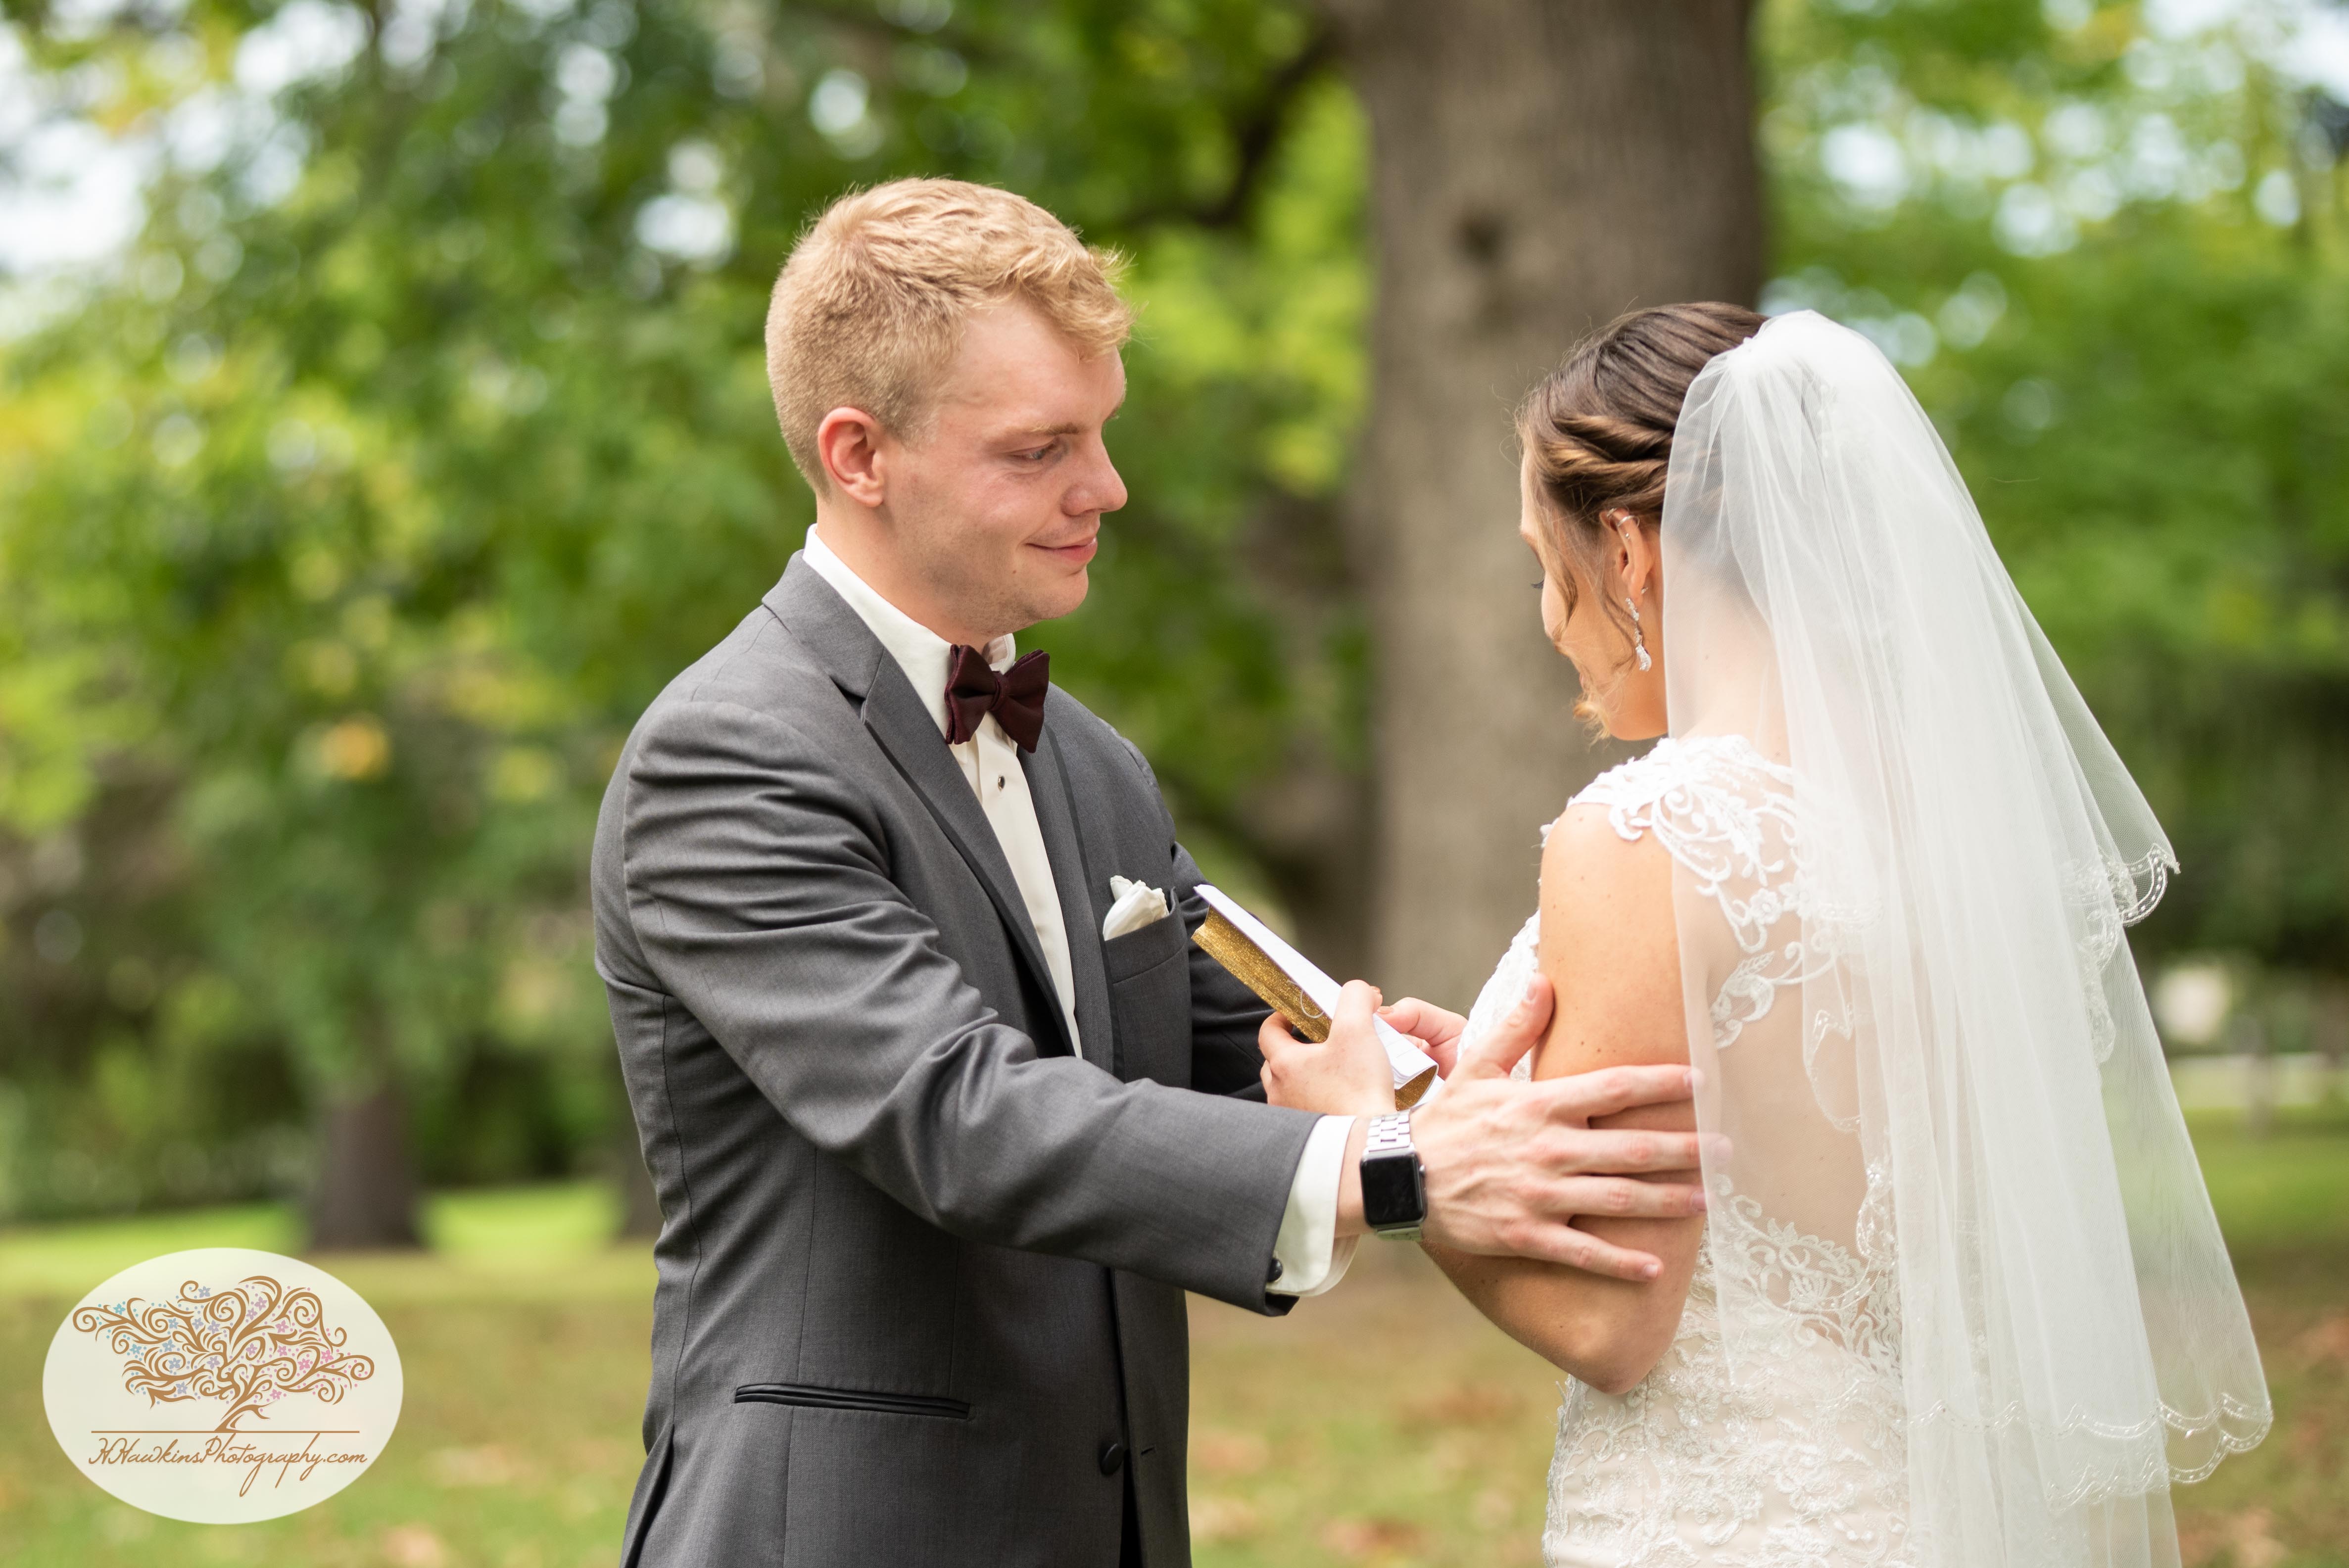 Groom comforts bride by touching her on the arm as she chokes up while reading her vows